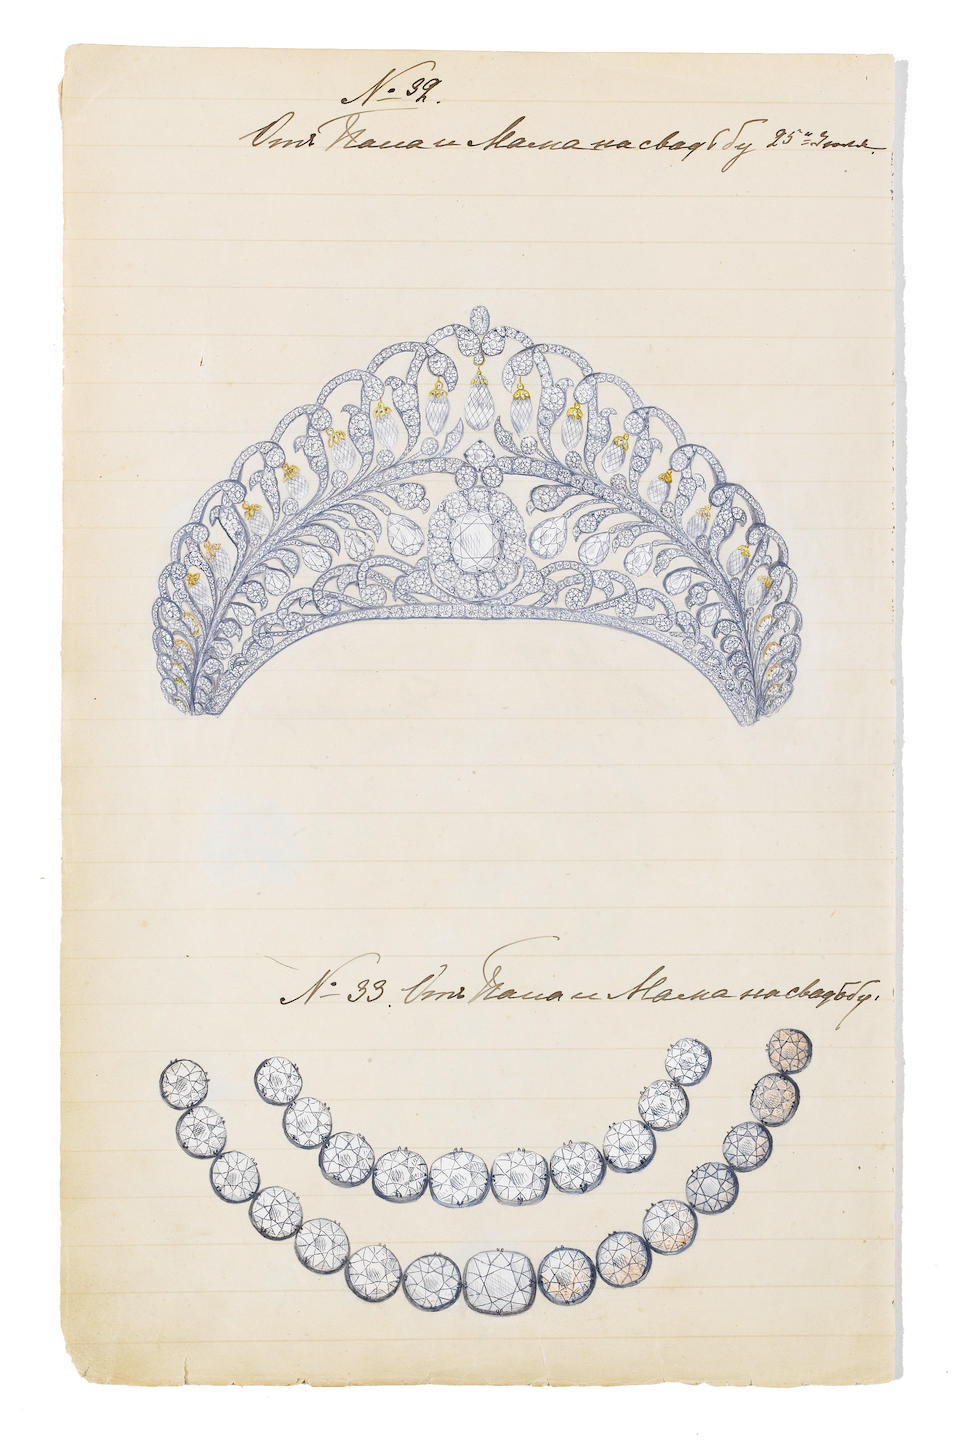 Ksenia (Xenia) Alexandrovna, Grand Duchess of Russia (6 April 1875 &#150; 20 April 1960)PERSONAL ILLUSTRATED INVENTORIES OF JEWELLERY AND BIBELOTS FROM 24TH JUNE 1880 TO 1905, AND OF JEWELLERY FROM 12 JANUARY 1894 TO 25 MARCH 1912, IN TWO VOLUMES